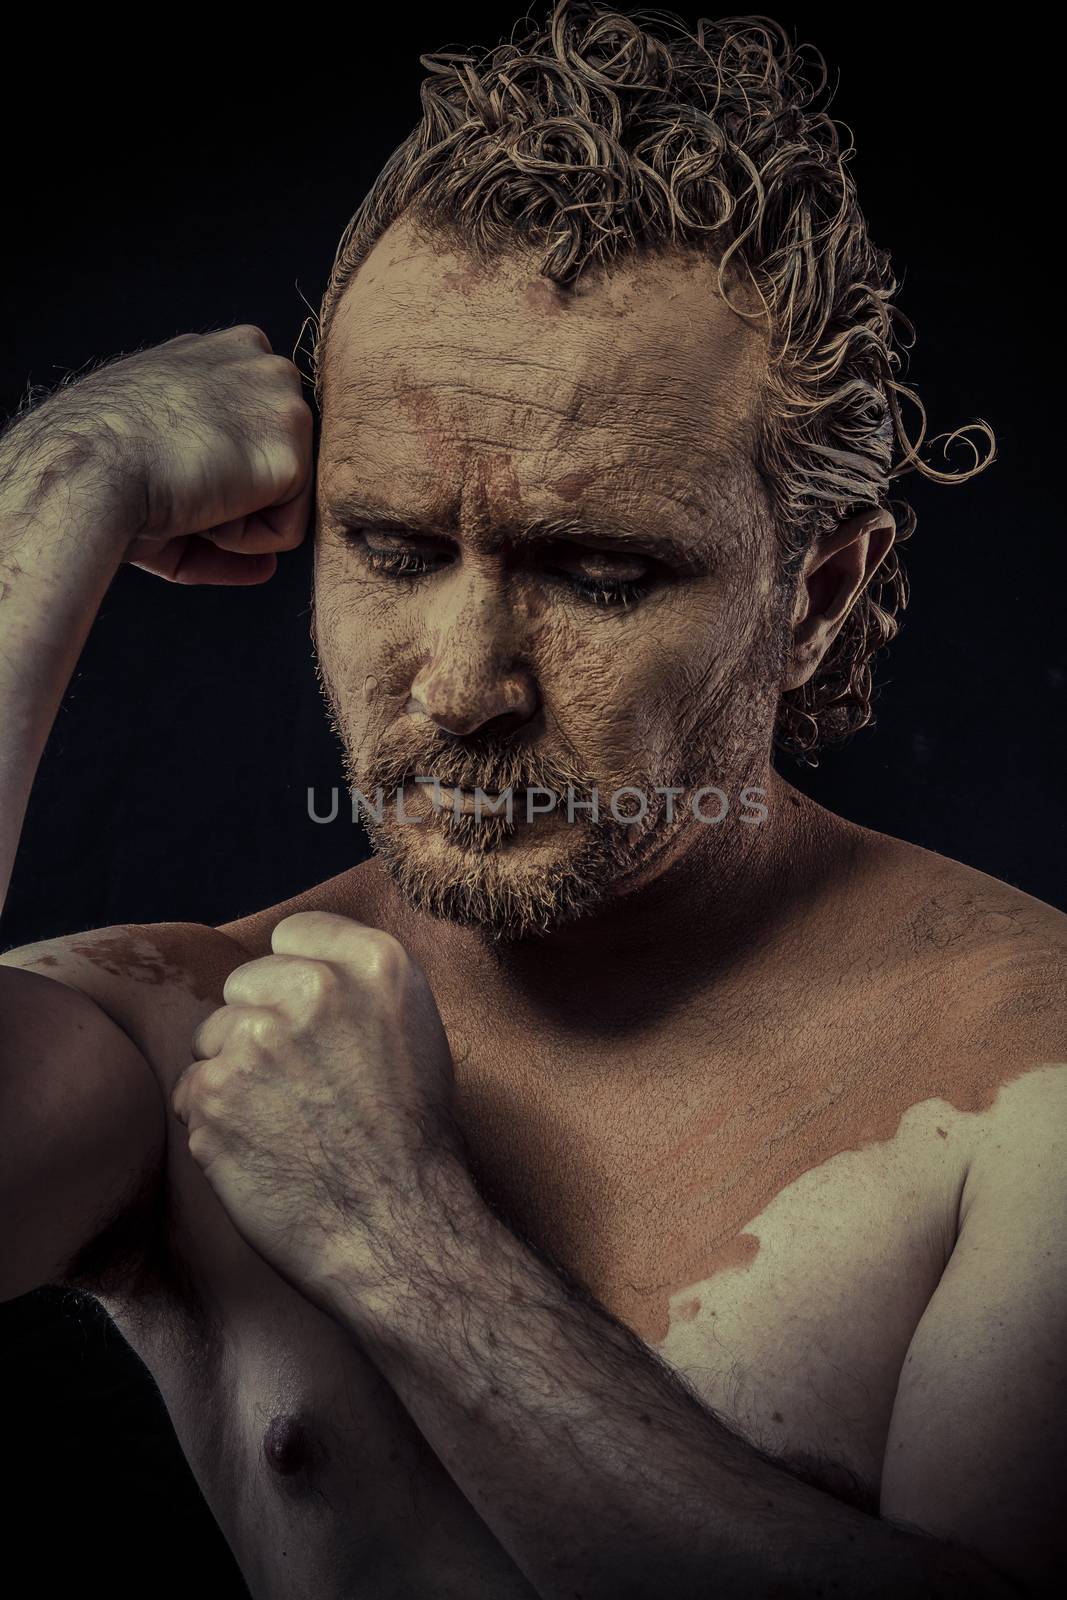 man with mud all over his body, naked, conceptual art by FernandoCortes